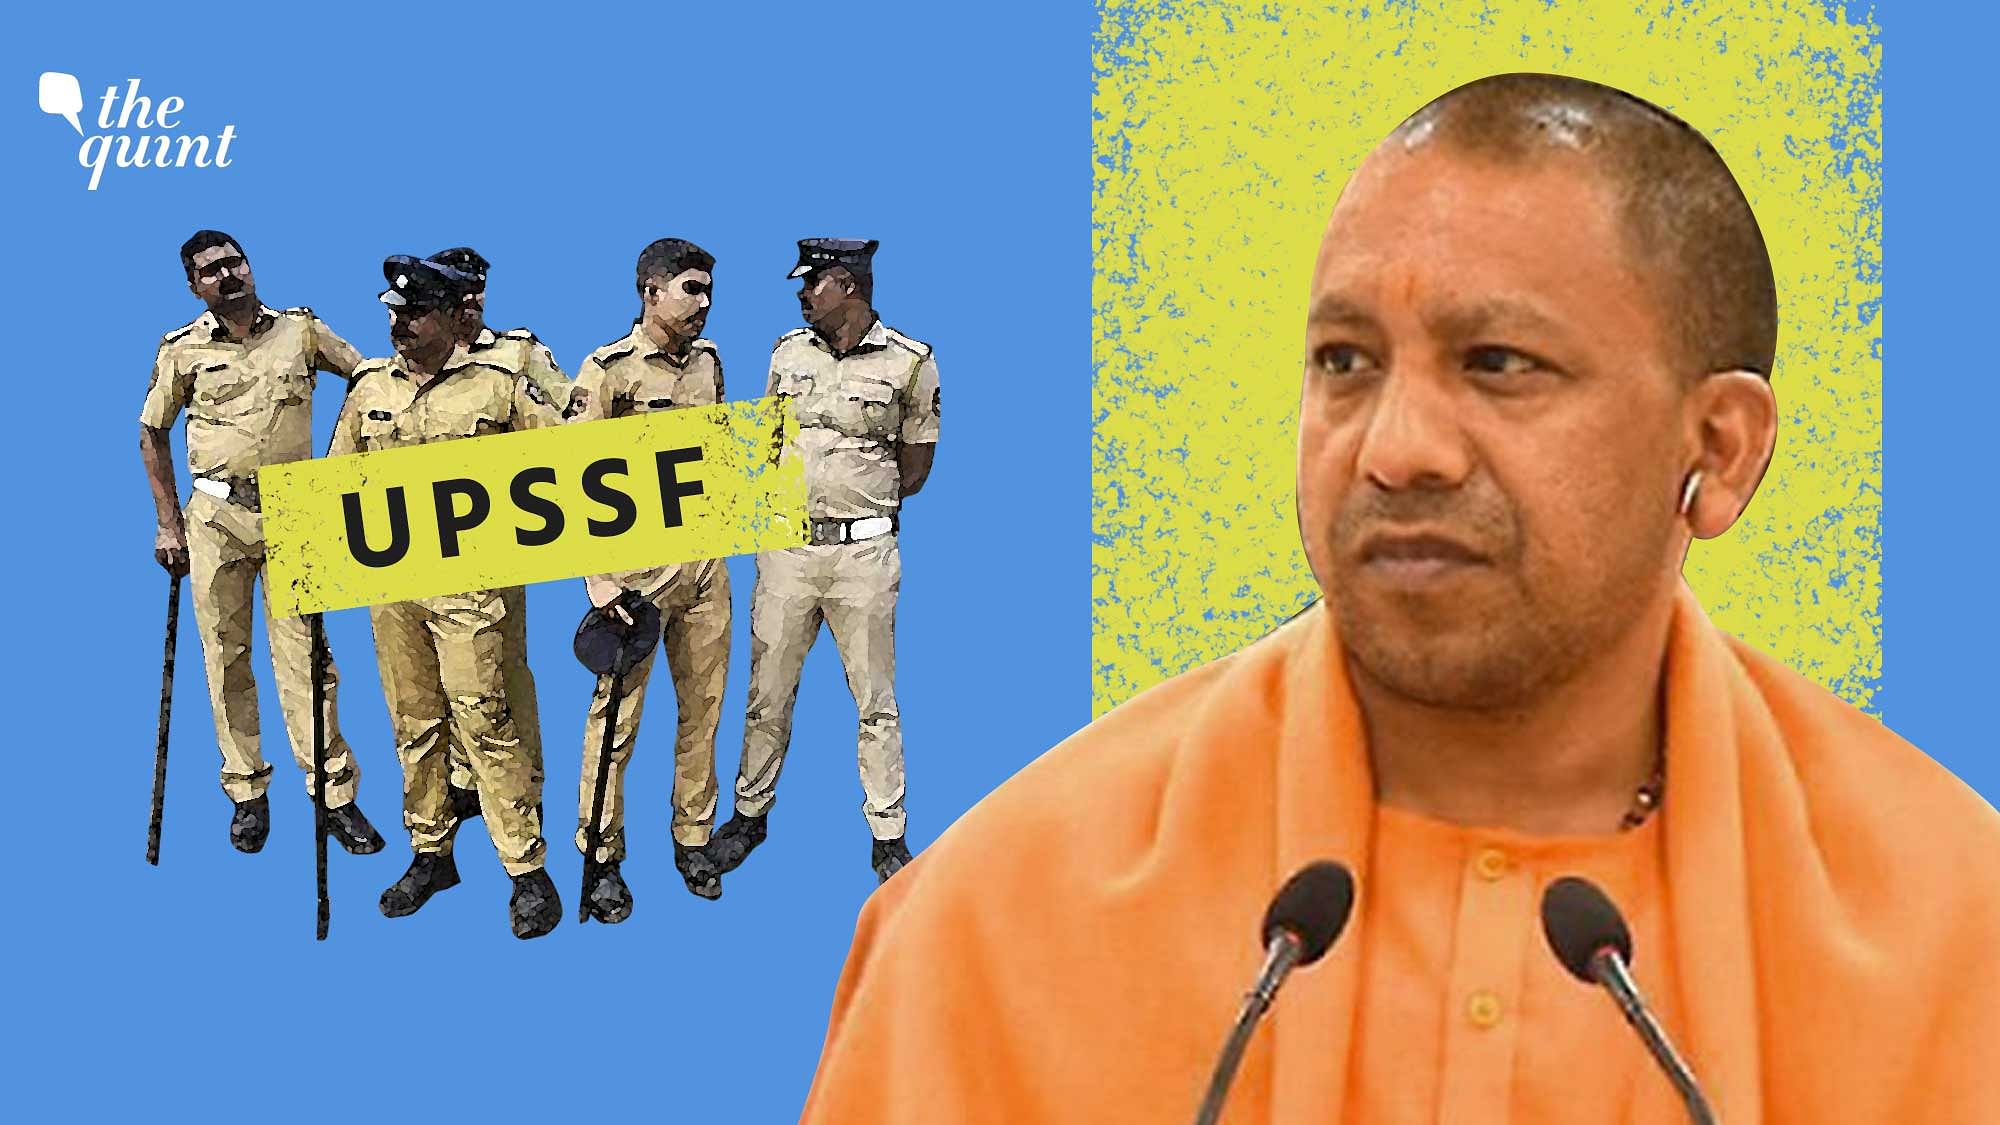 The Yogi government recently announced the formation of a new special security force with controversial powers.